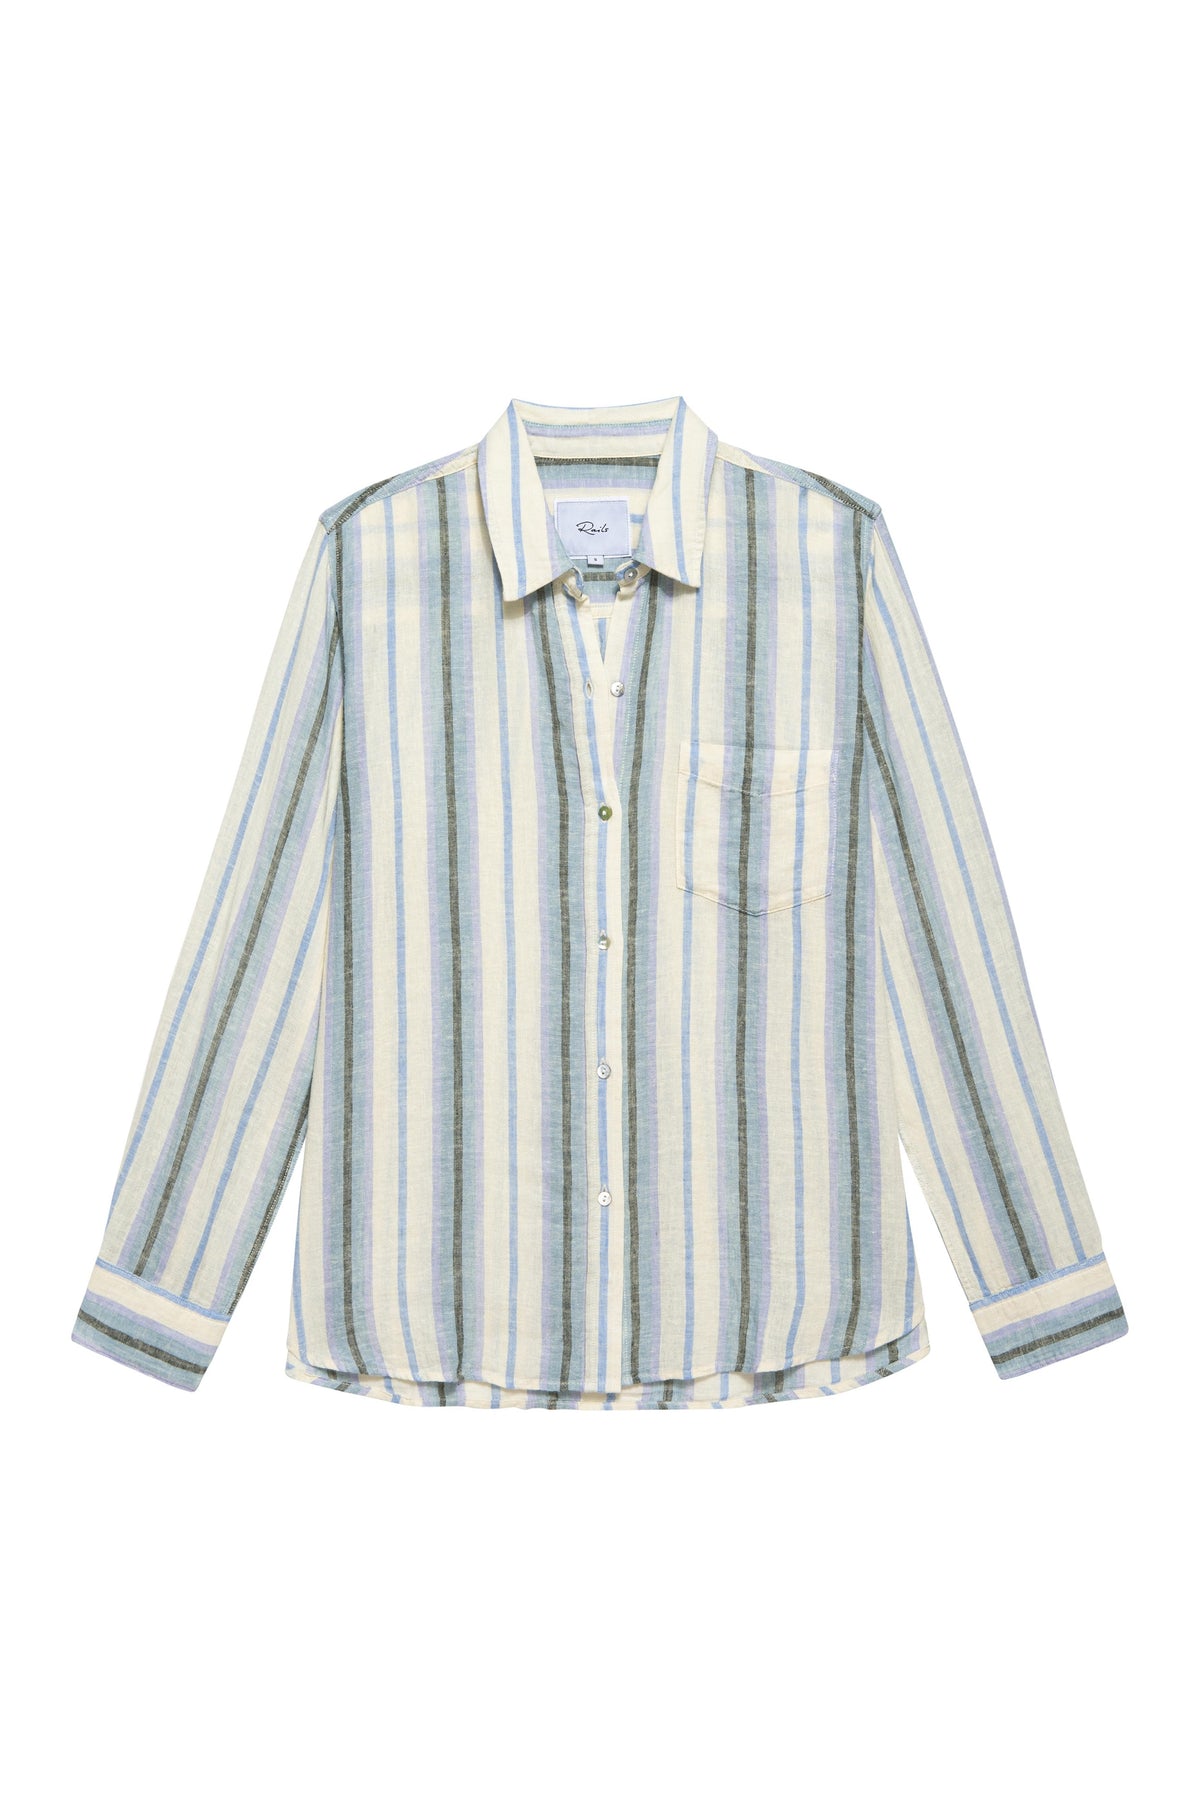 Ecru and blue striped shirt with classic collar and long sleeves